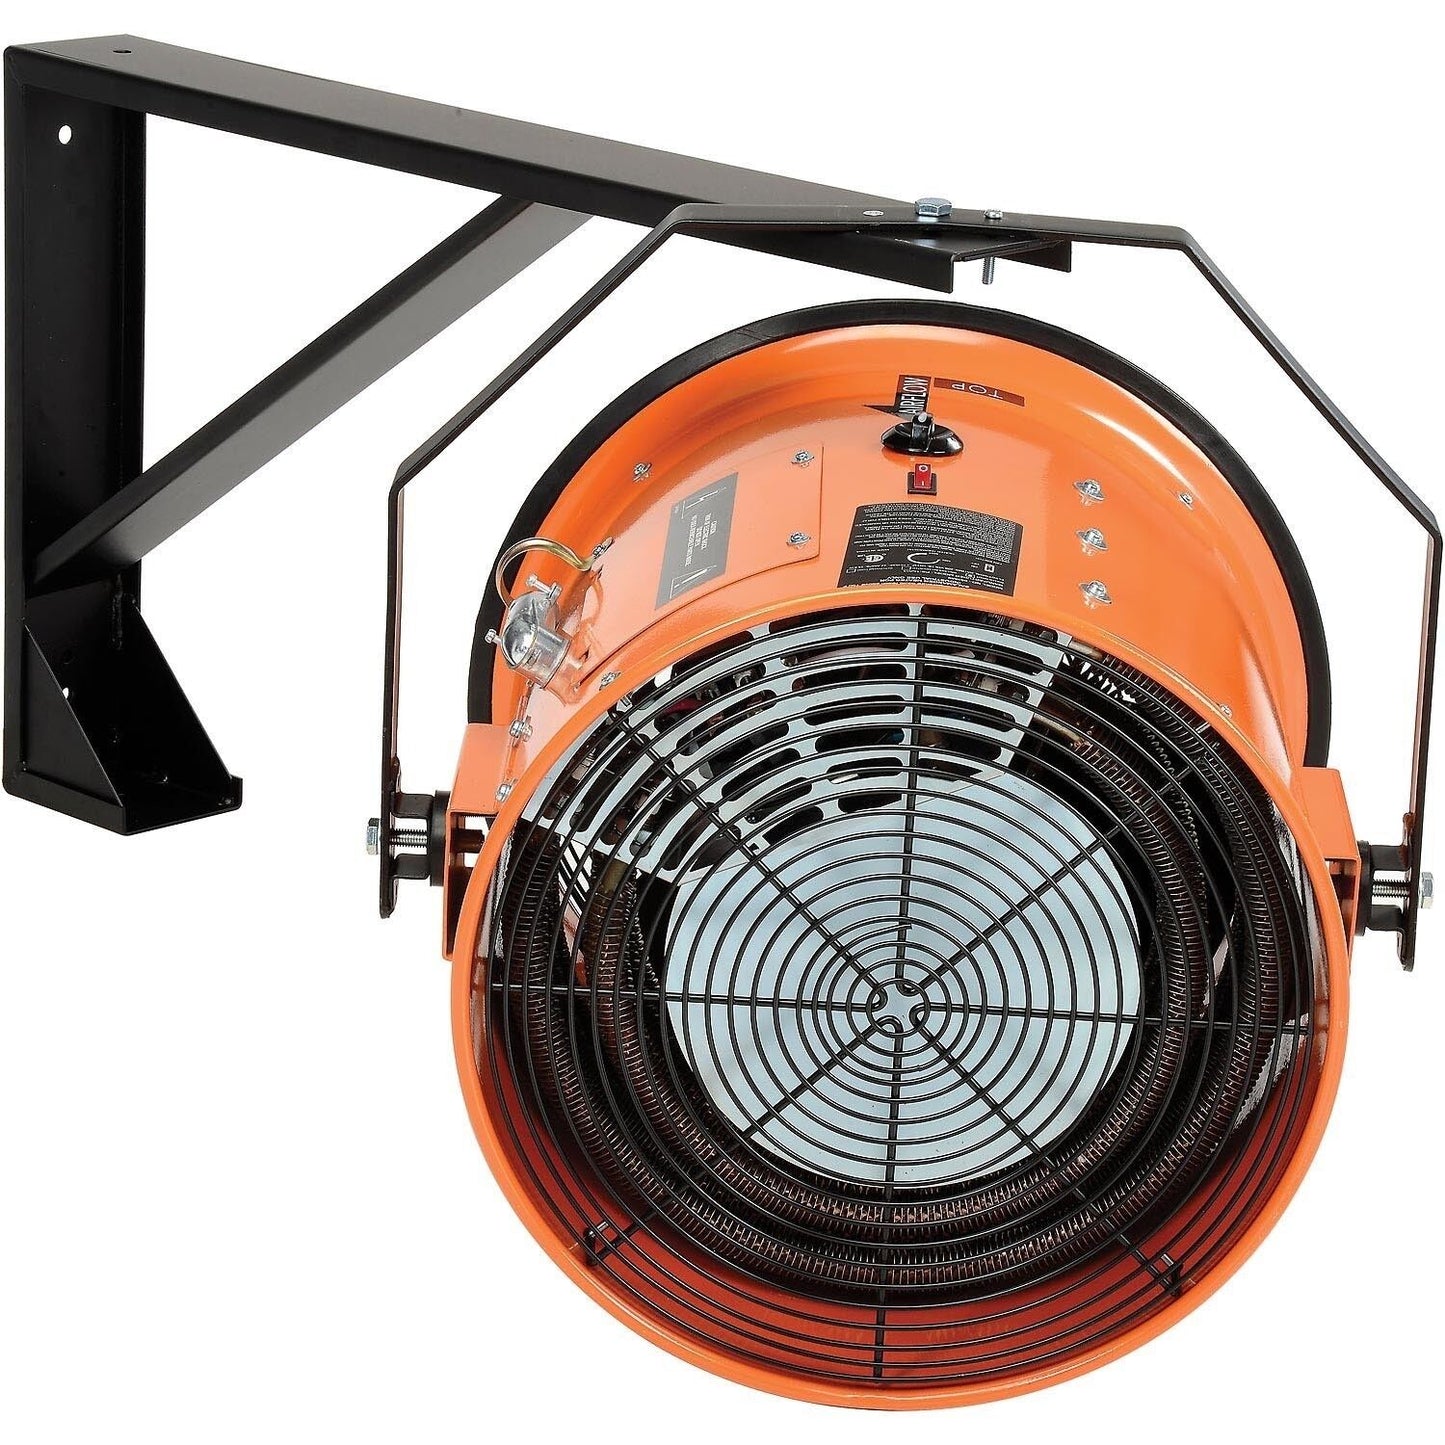 Electric Wall HEATER - Forced Fan - 208 Volts - 3 Phase - 51,180 BTU - 1,500 CFM